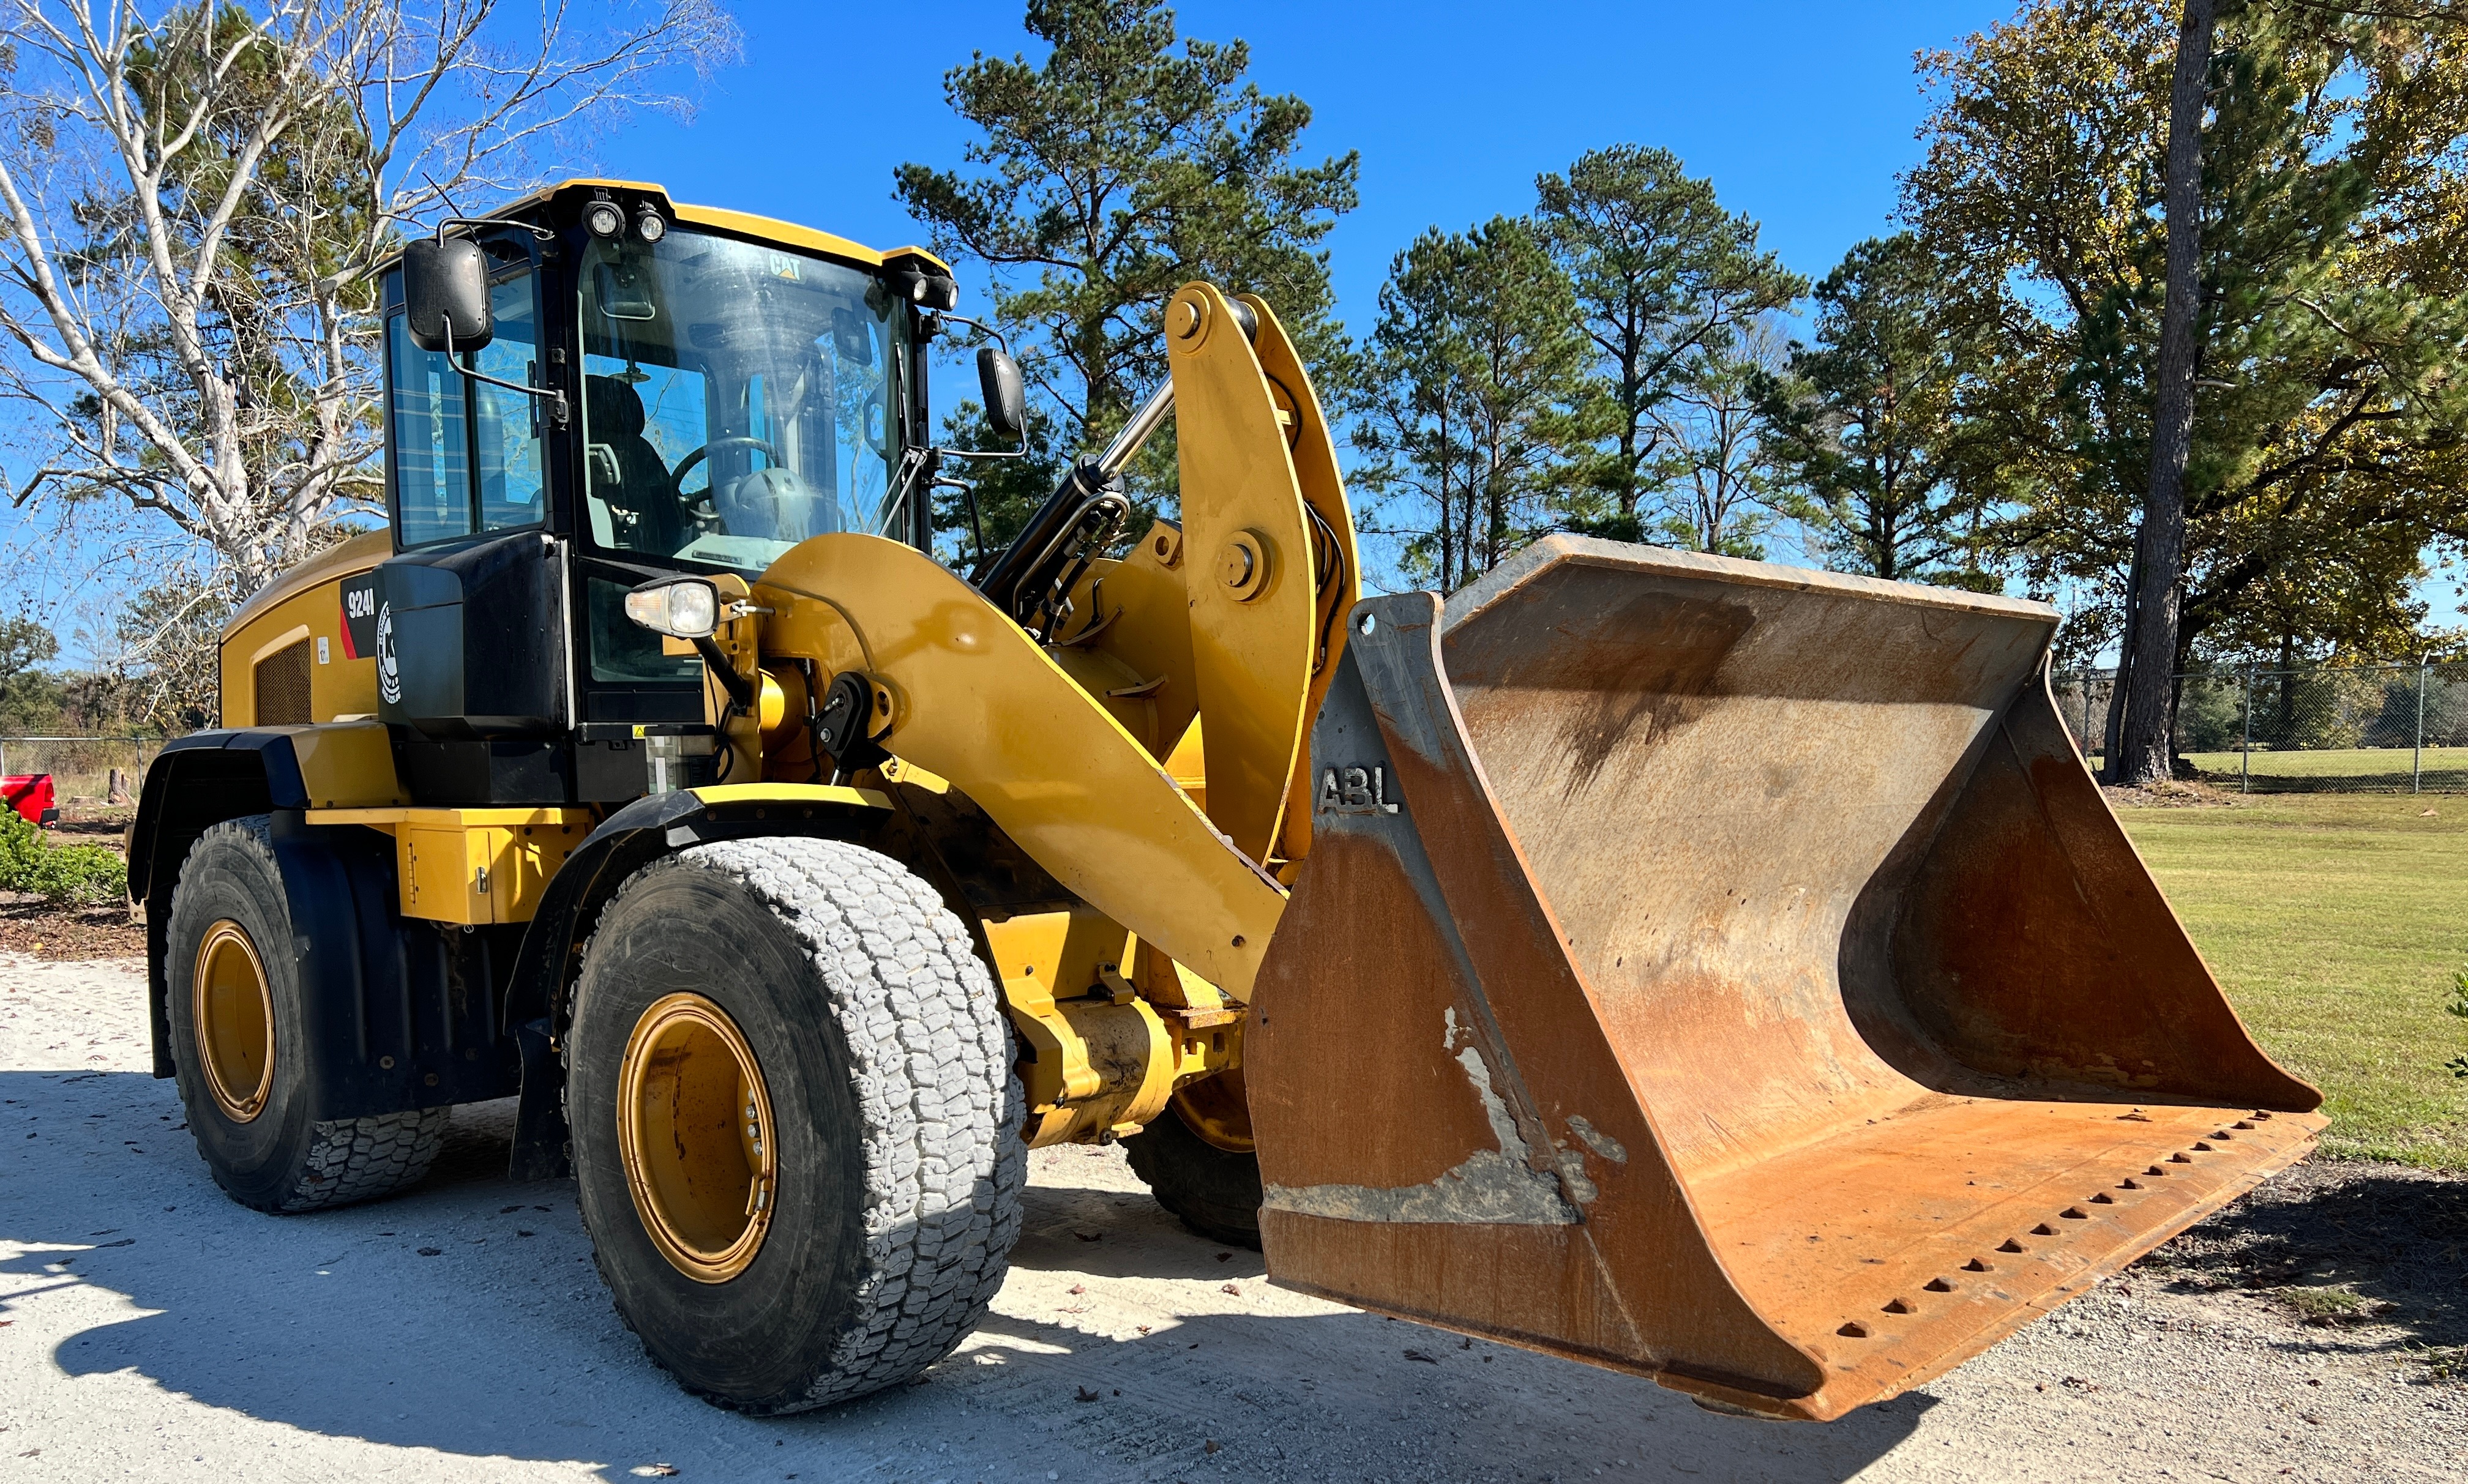 Used 2014 Caterpillar 924K For Sale